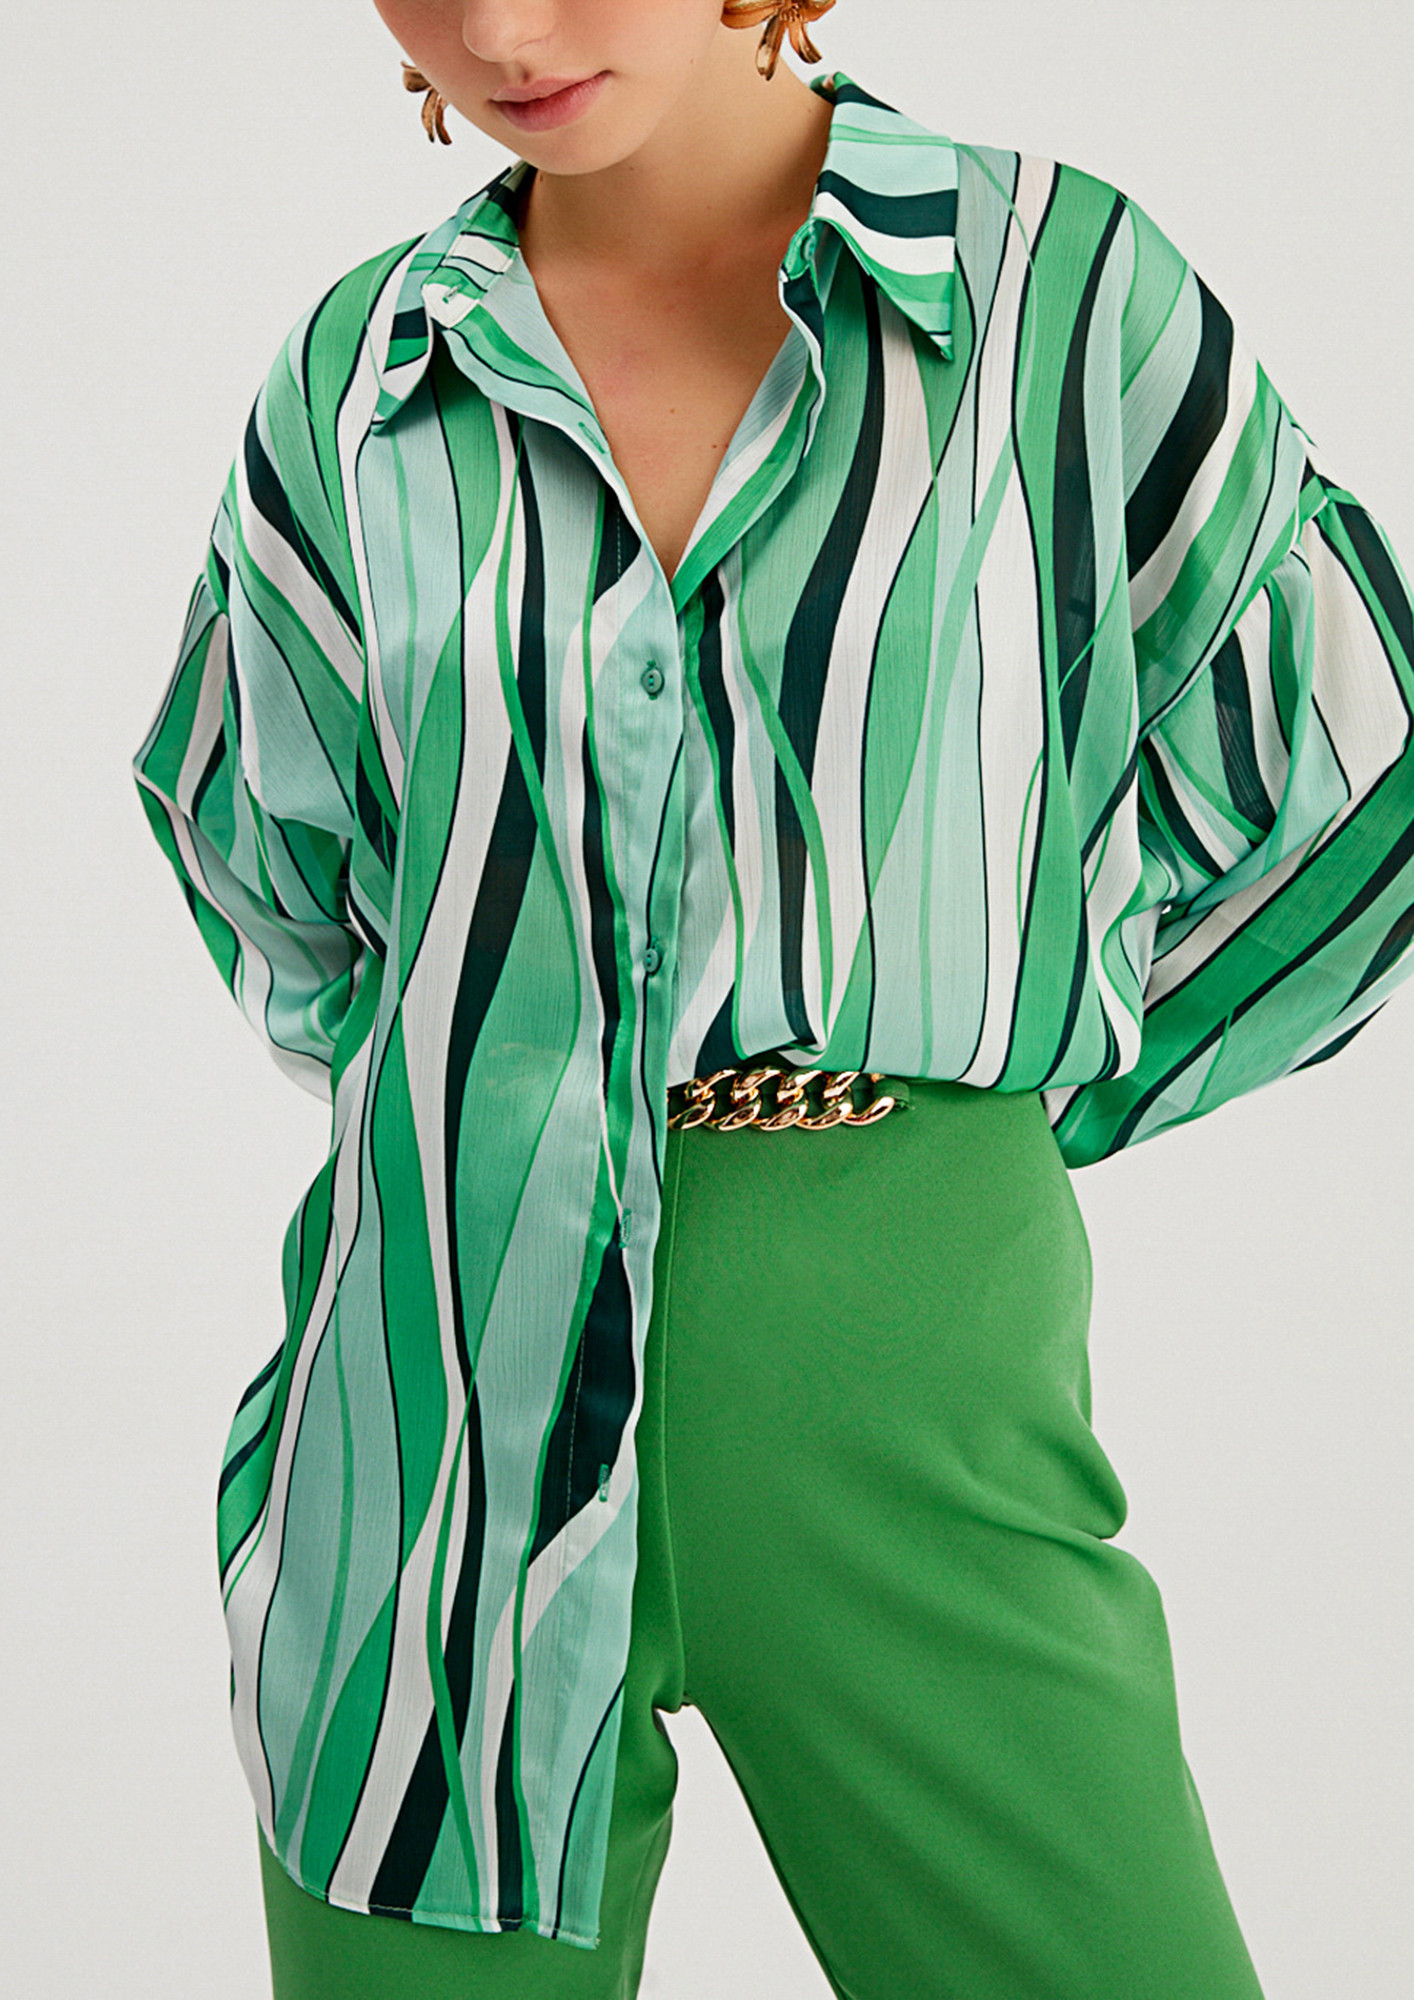 Green White Striped Shirts - Buy Green White Striped Shirts online in India